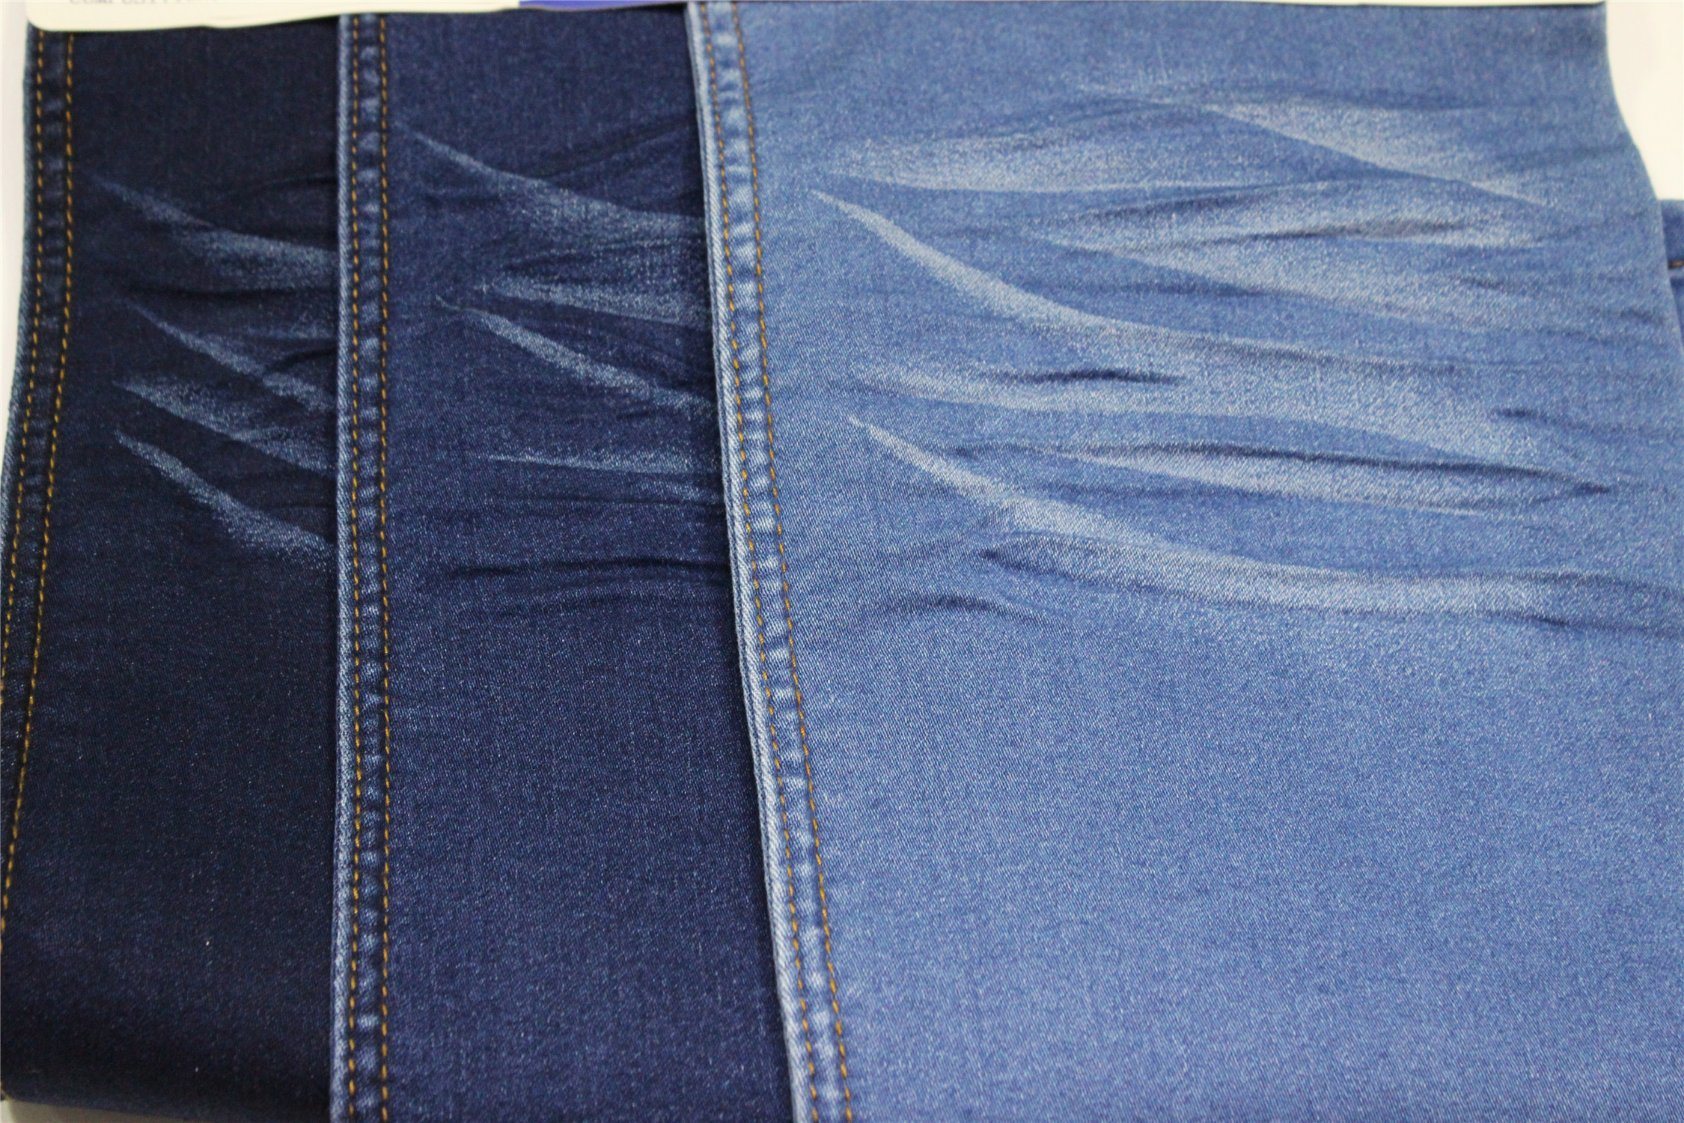 Cotton Polyester Spandex Denim With Rayon